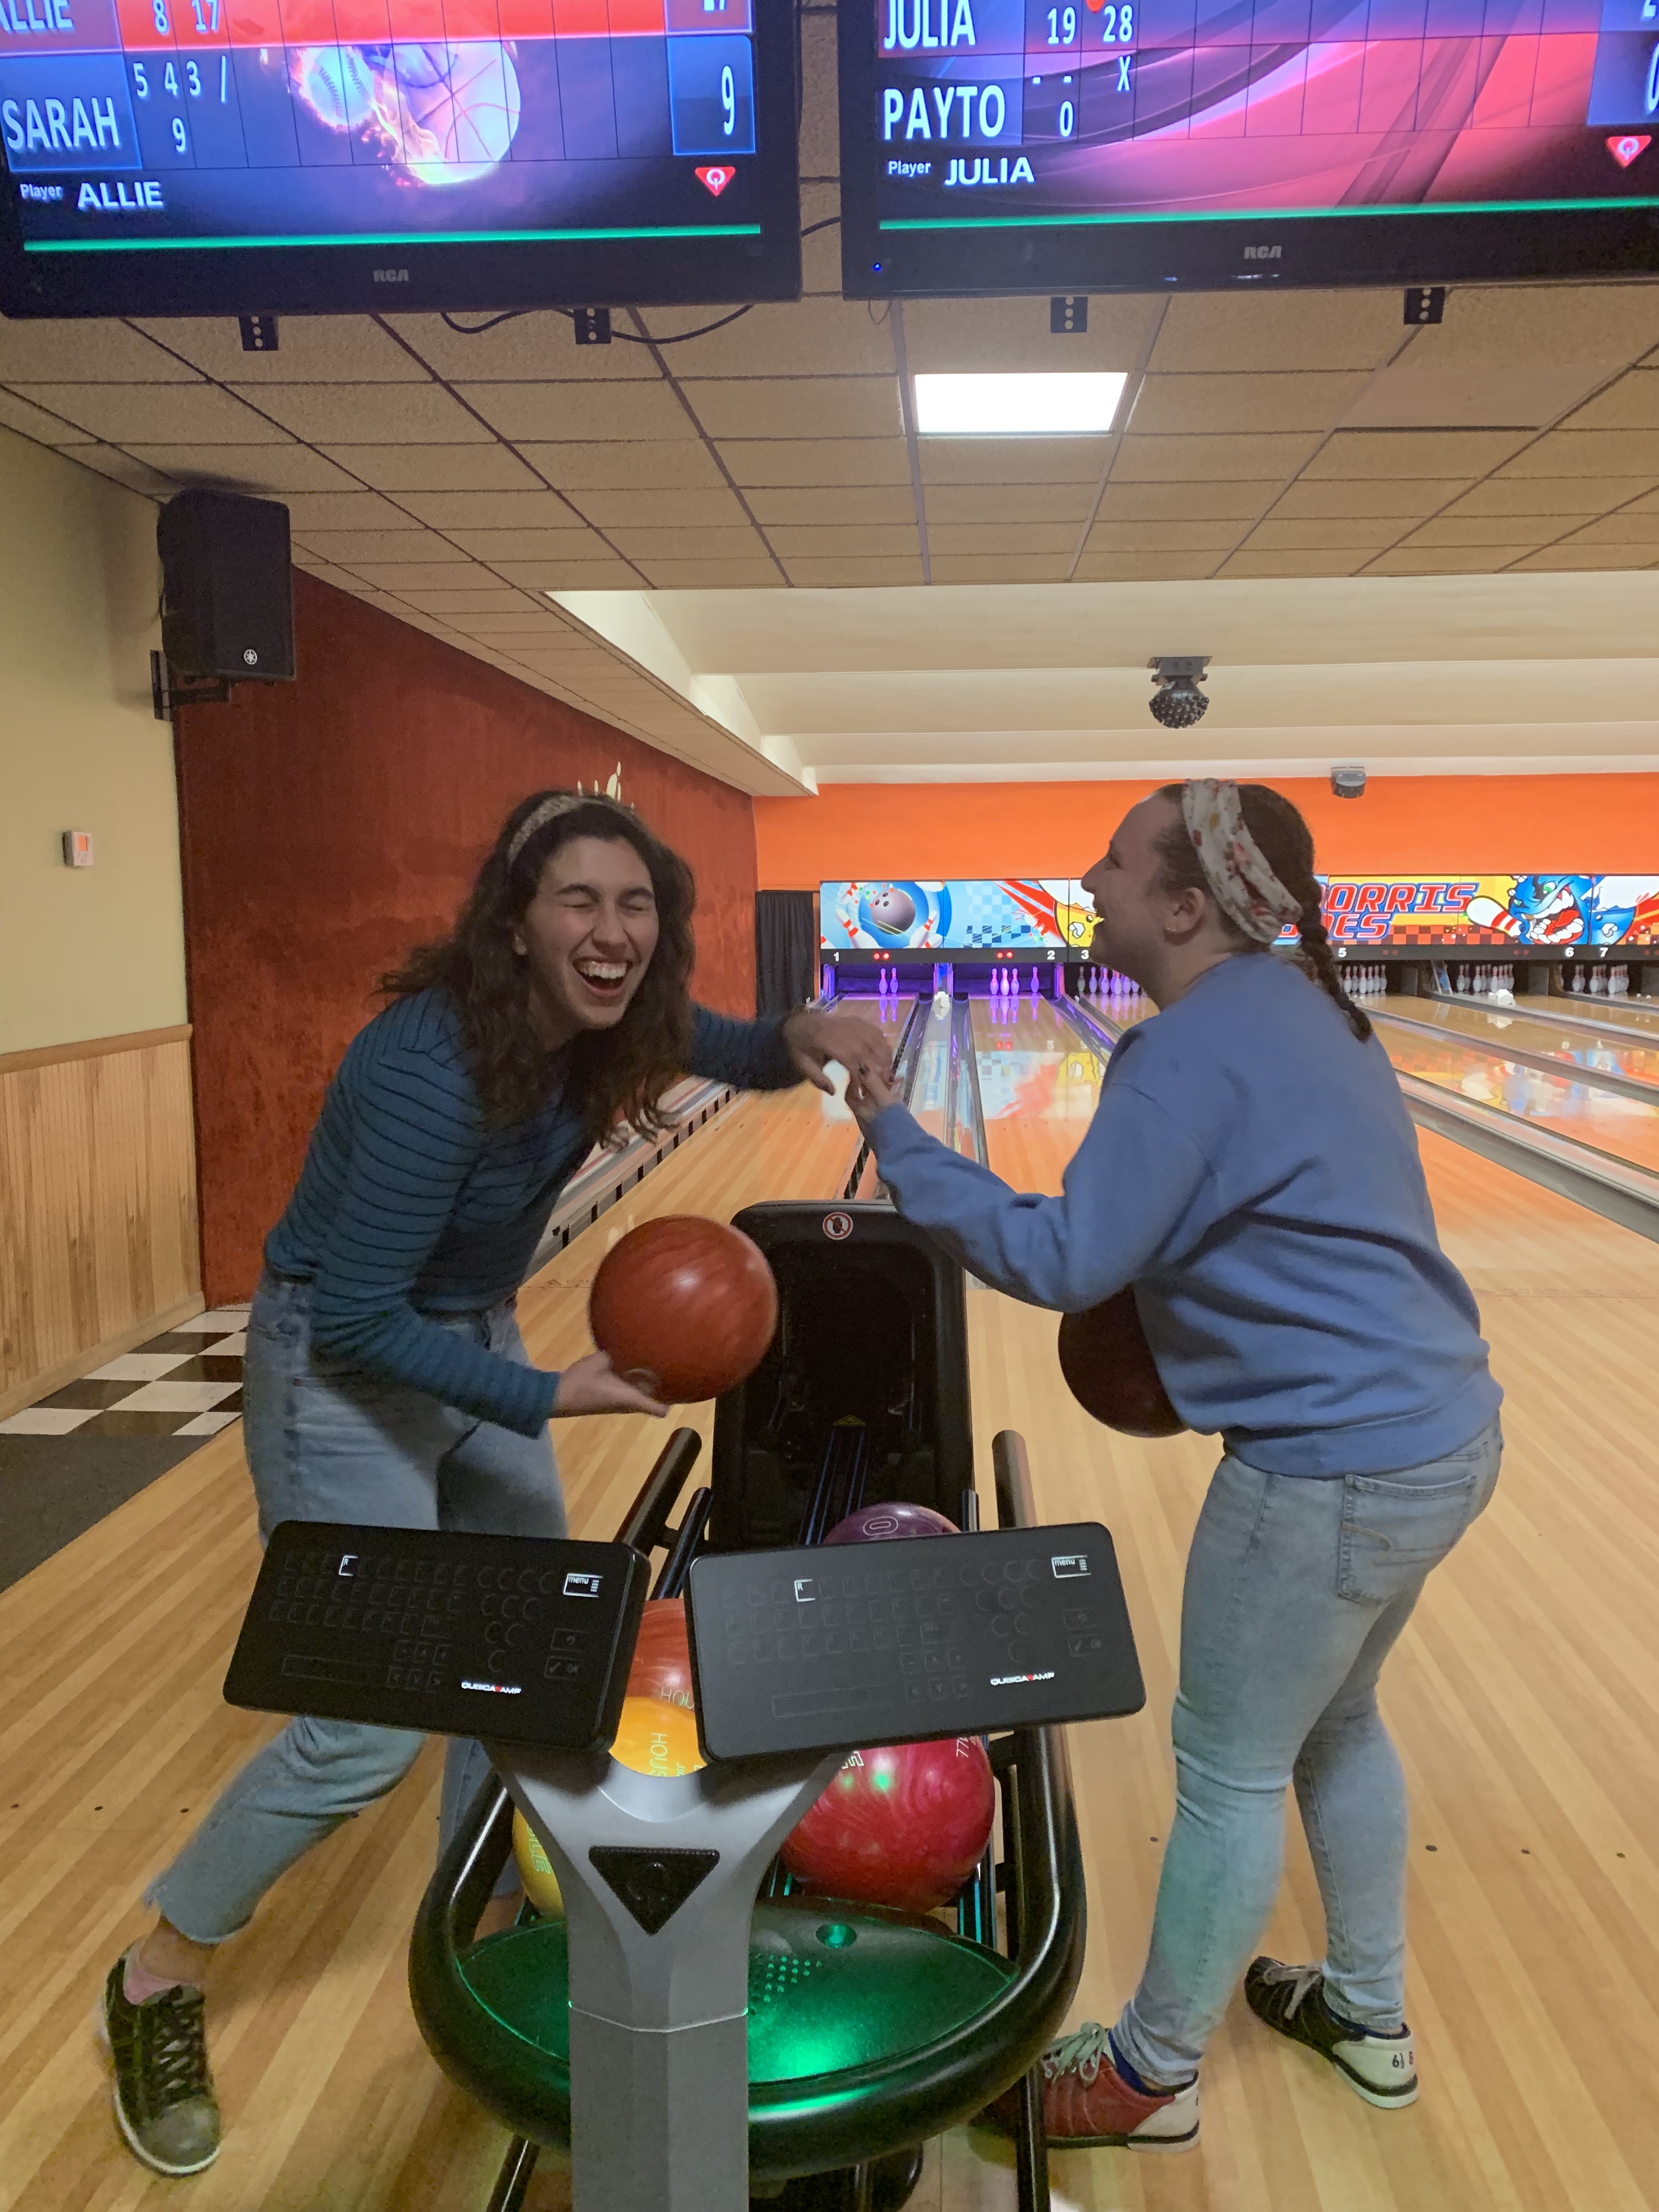 Students bowling and laughing